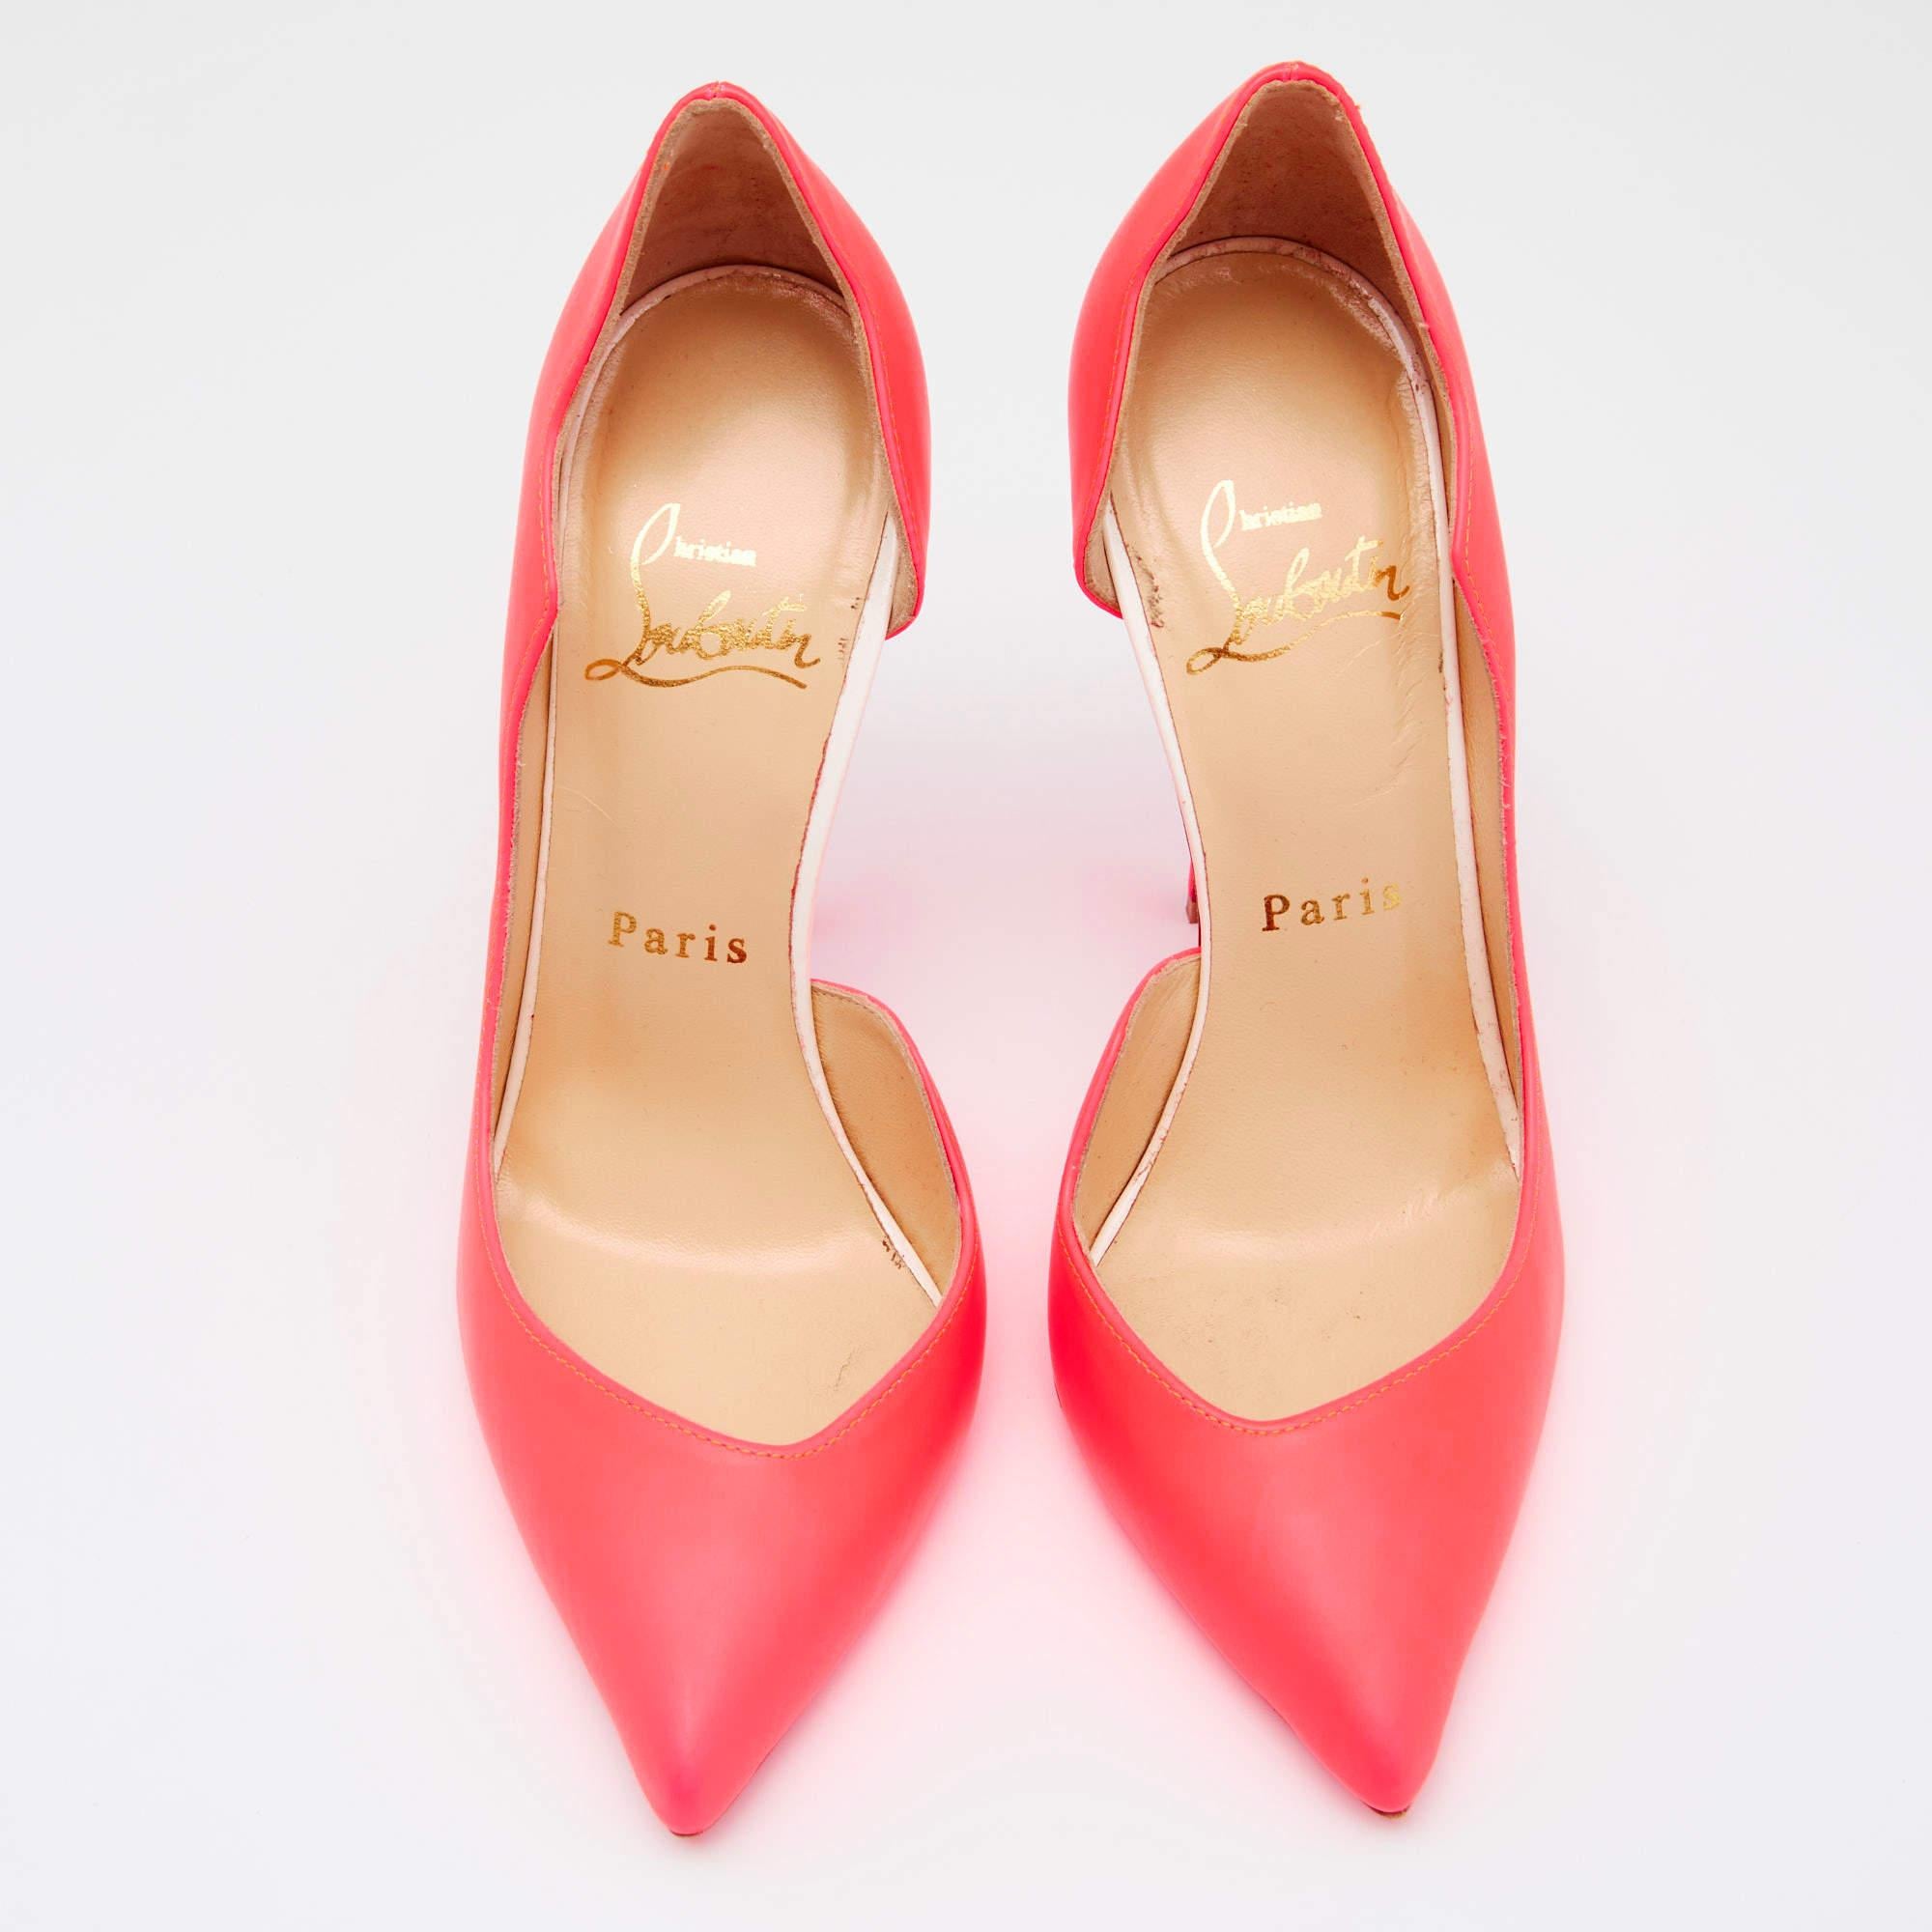 Christian Louboutin Neon Pink Leather Dalida D'orsay Pumps Size 35 In Good Condition For Sale In Dubai, Al Qouz 2